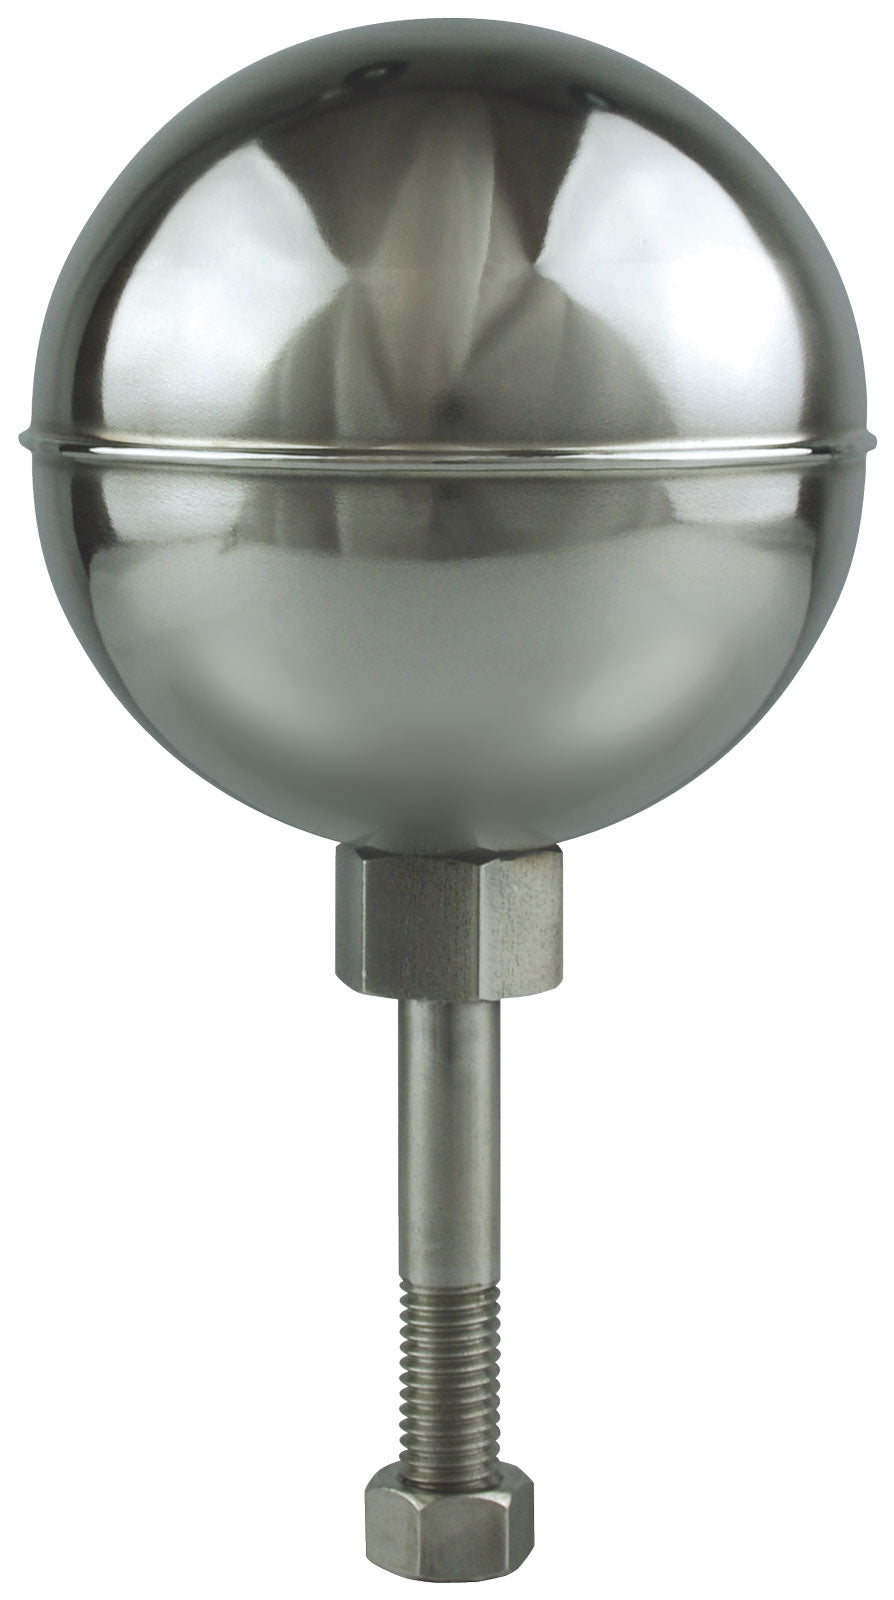 Mirror Finish Stainless Steel Ball Flagpole Ornament - 1/2